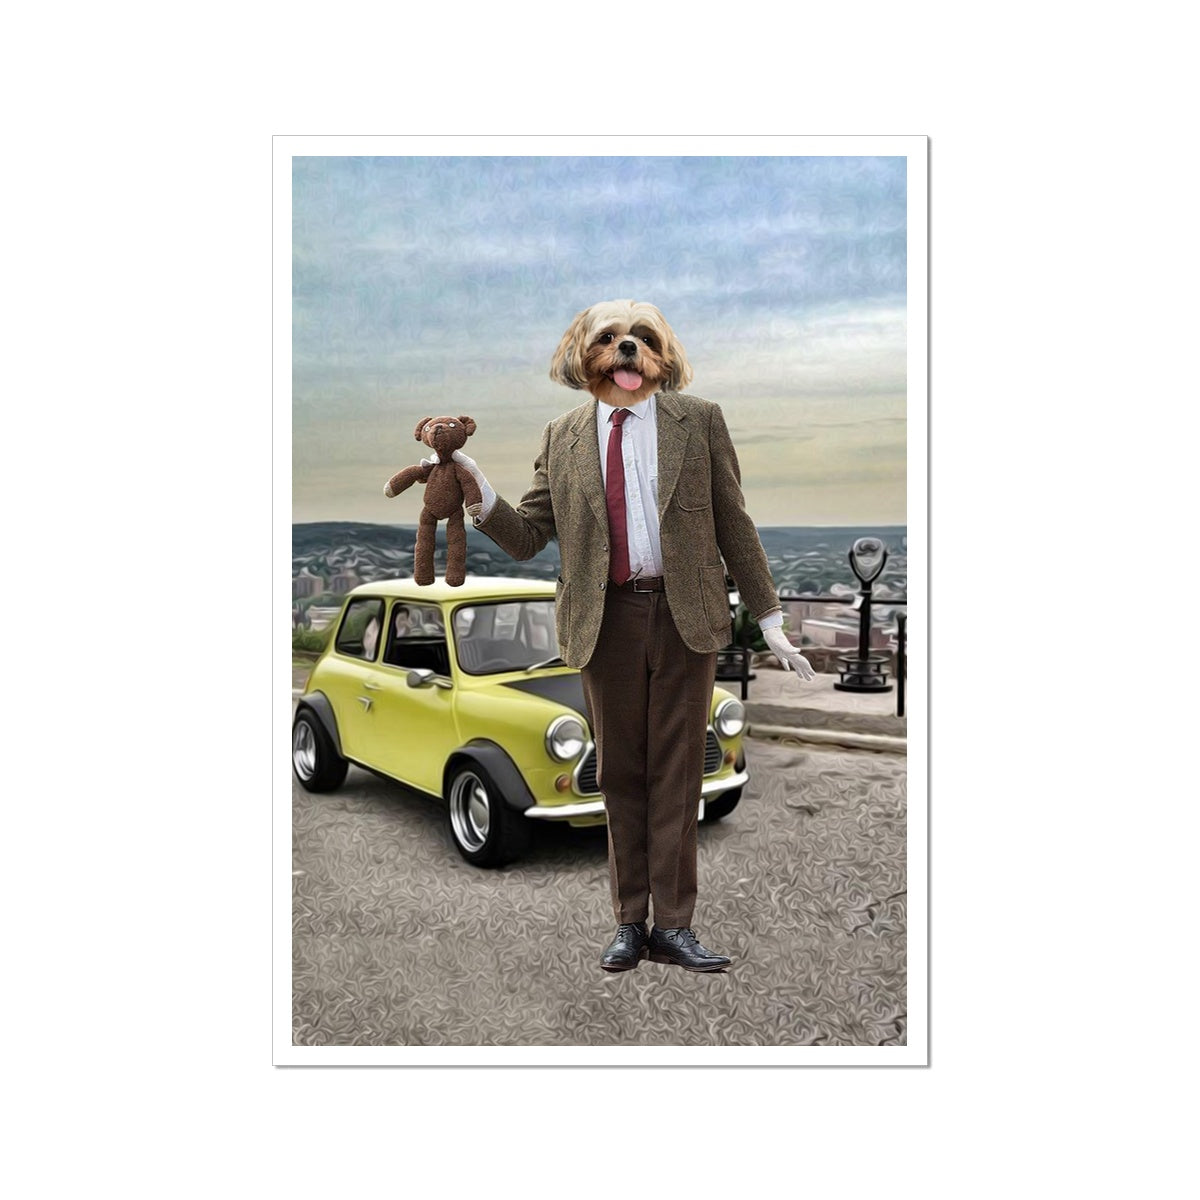 Mr Bean: Custom Pet Poster - Paw & Glory - #pet portraits# - #dog portraits# - #pet portraits uk#Paw & Glory, pawandglory, painting pets, pet portraits in oils, aristocratic dog portraits, pictures for pets, hogwarts dog houses, dog portraits as humans, pet portrait